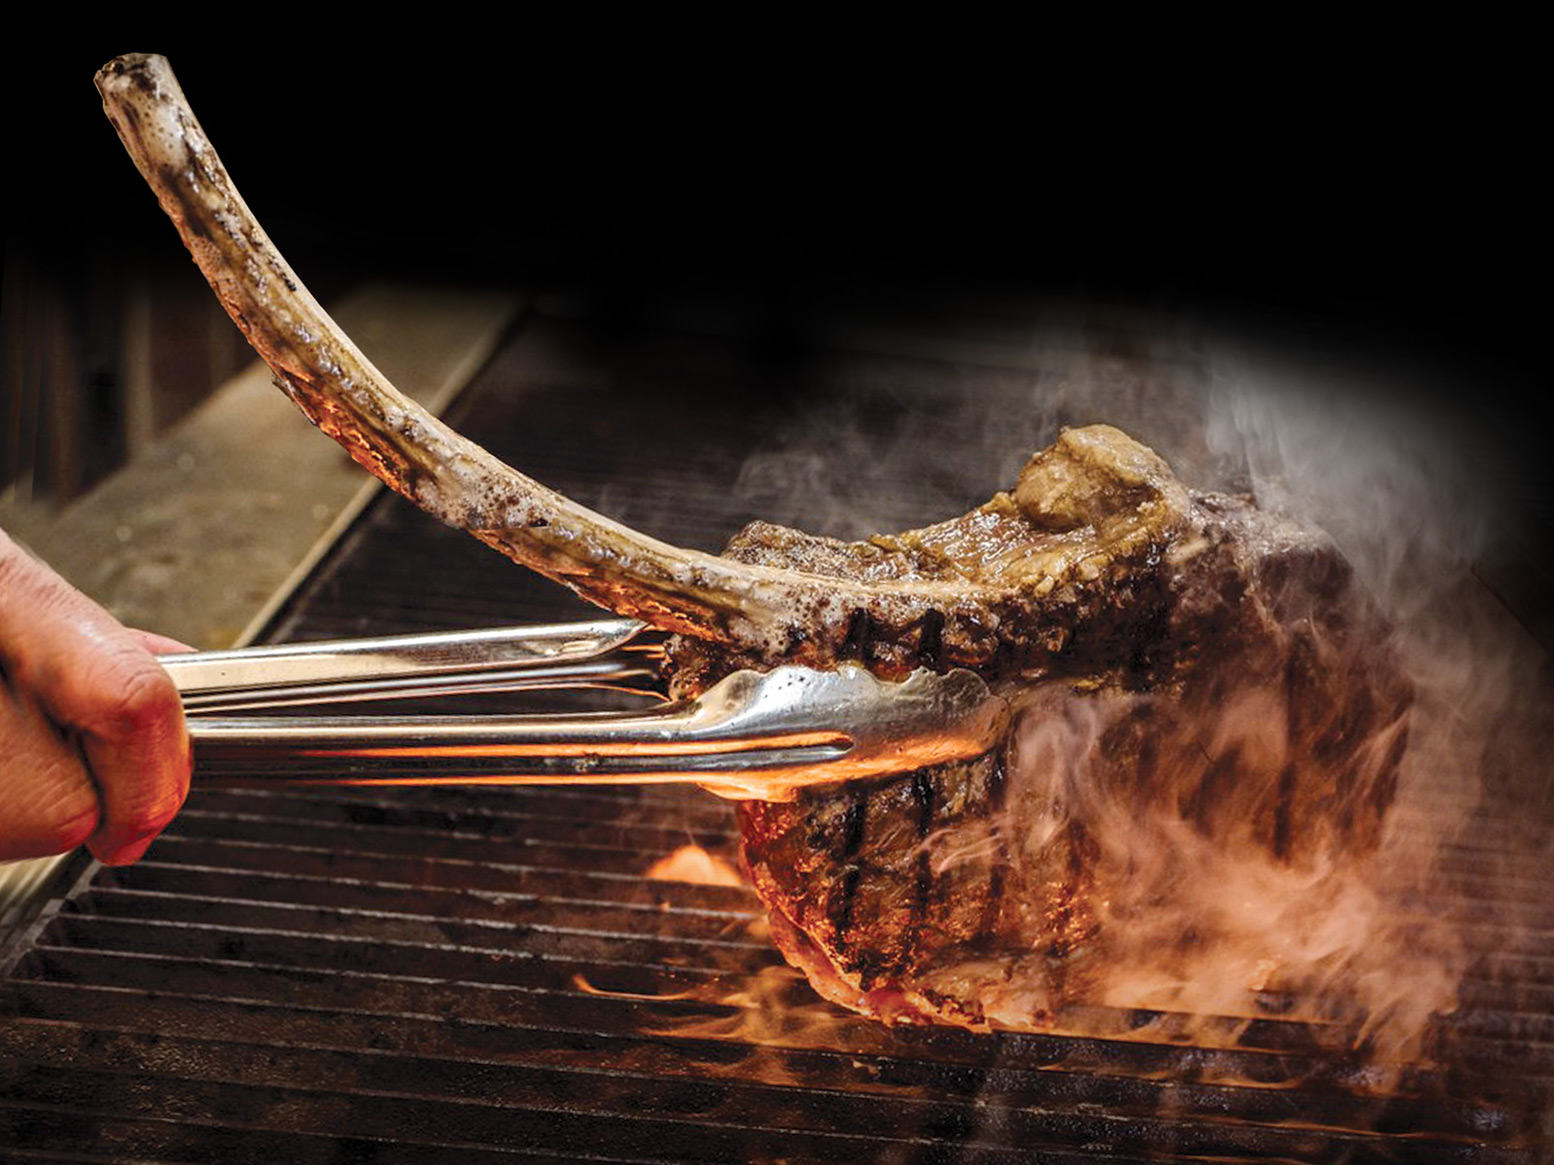 Tomahawk - The Fire Steakhouse.